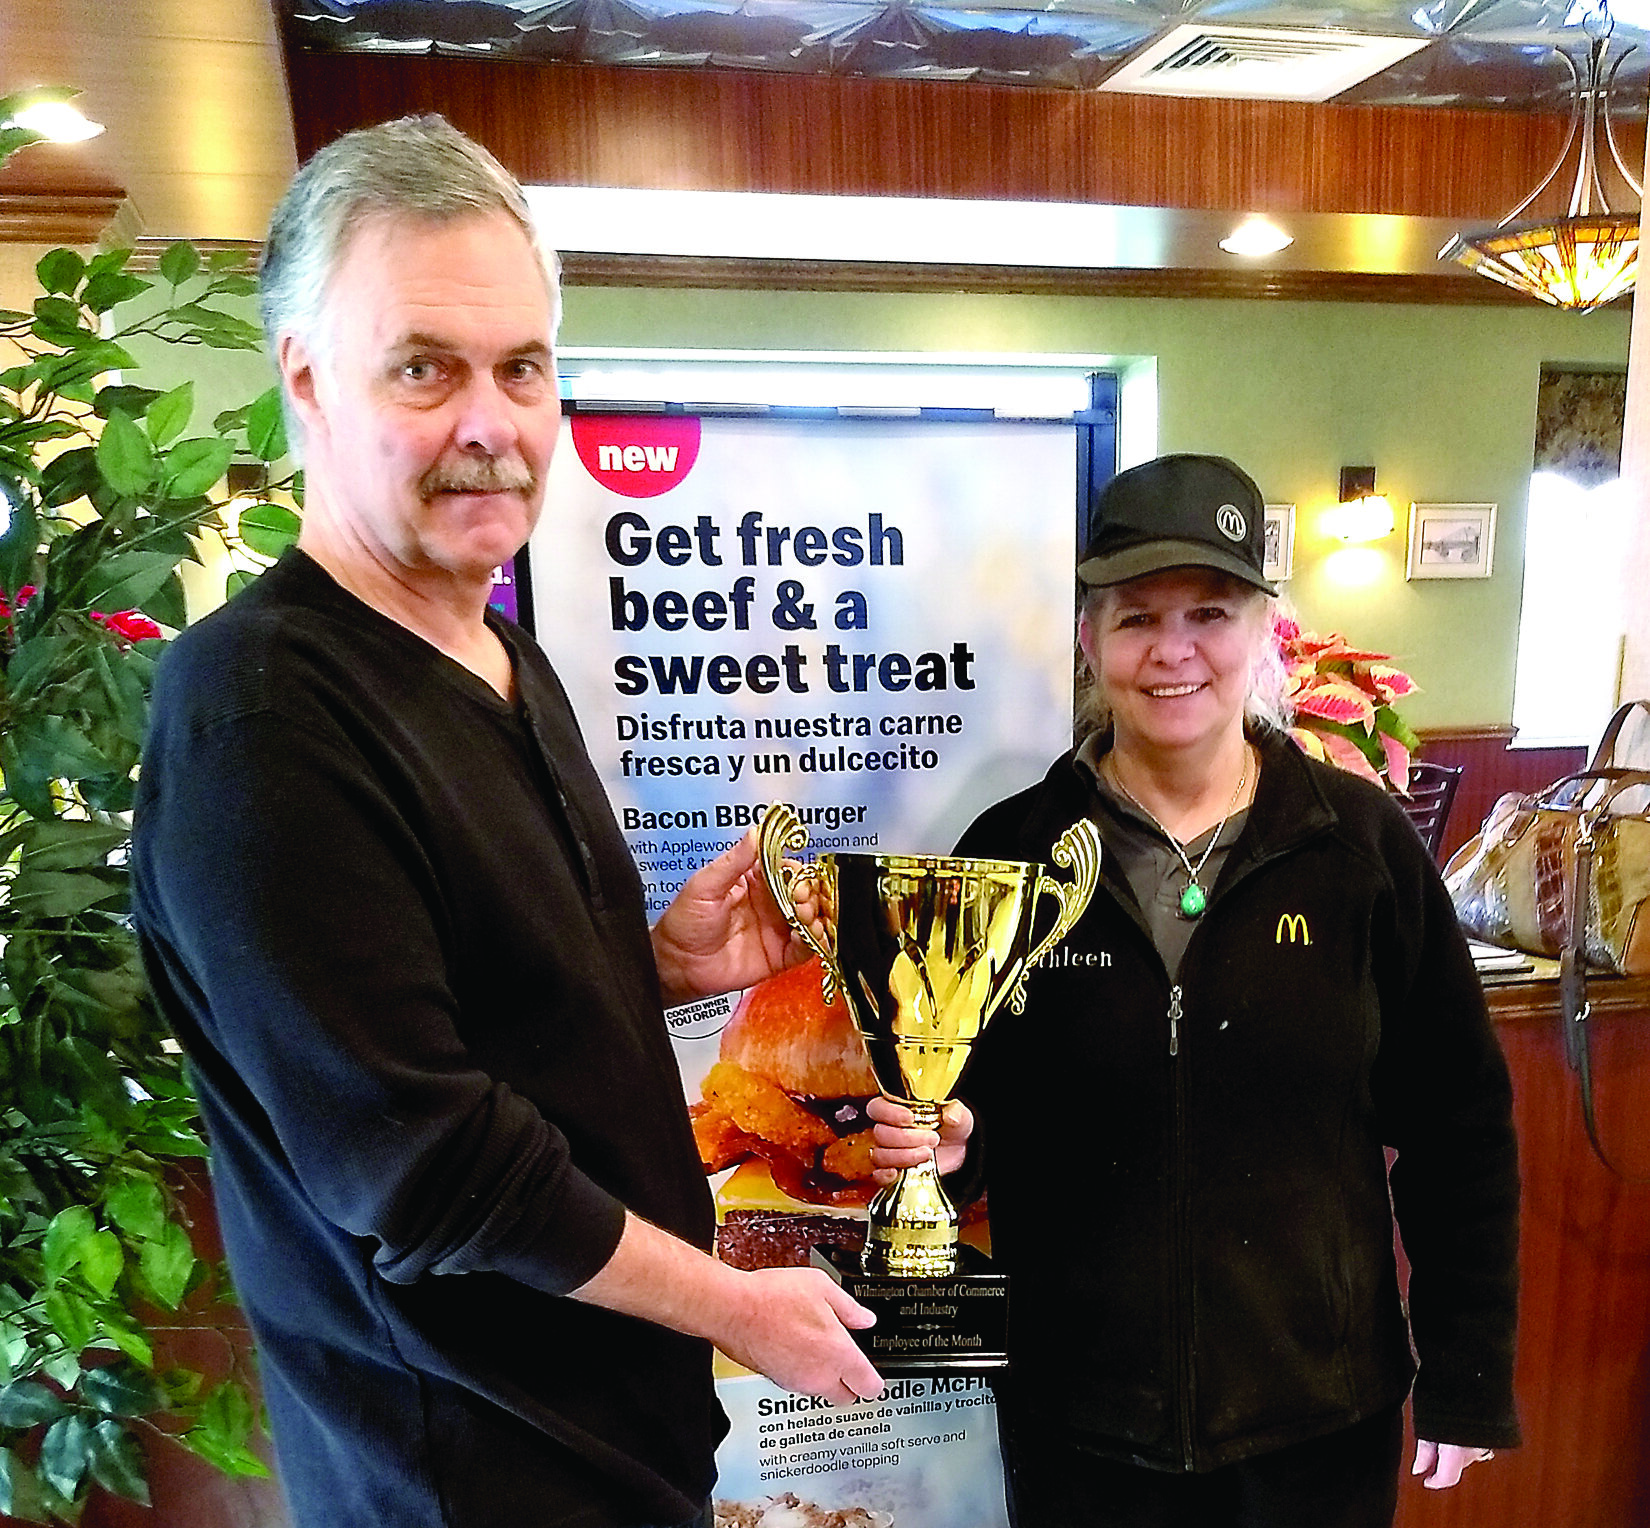 Service with a smile earns trophy